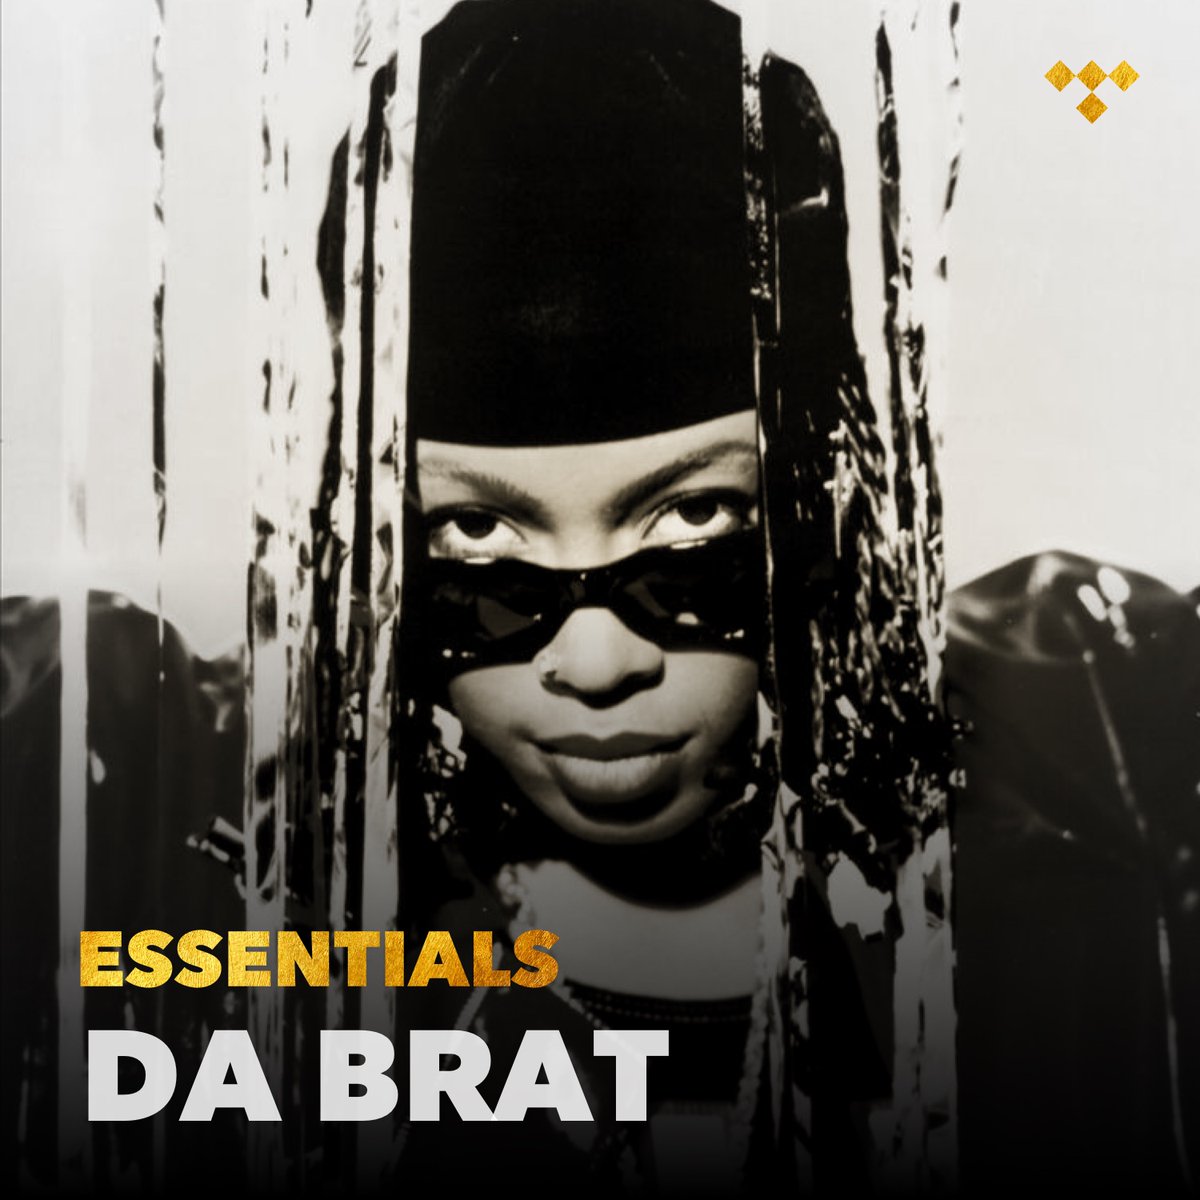 Happy birthday to @sosobrat! Da Brat celebrates 50 years! In 1994, she became the first femcee to go platinum with her debut 'Funkdafied'. tidal.link/3TEJbve